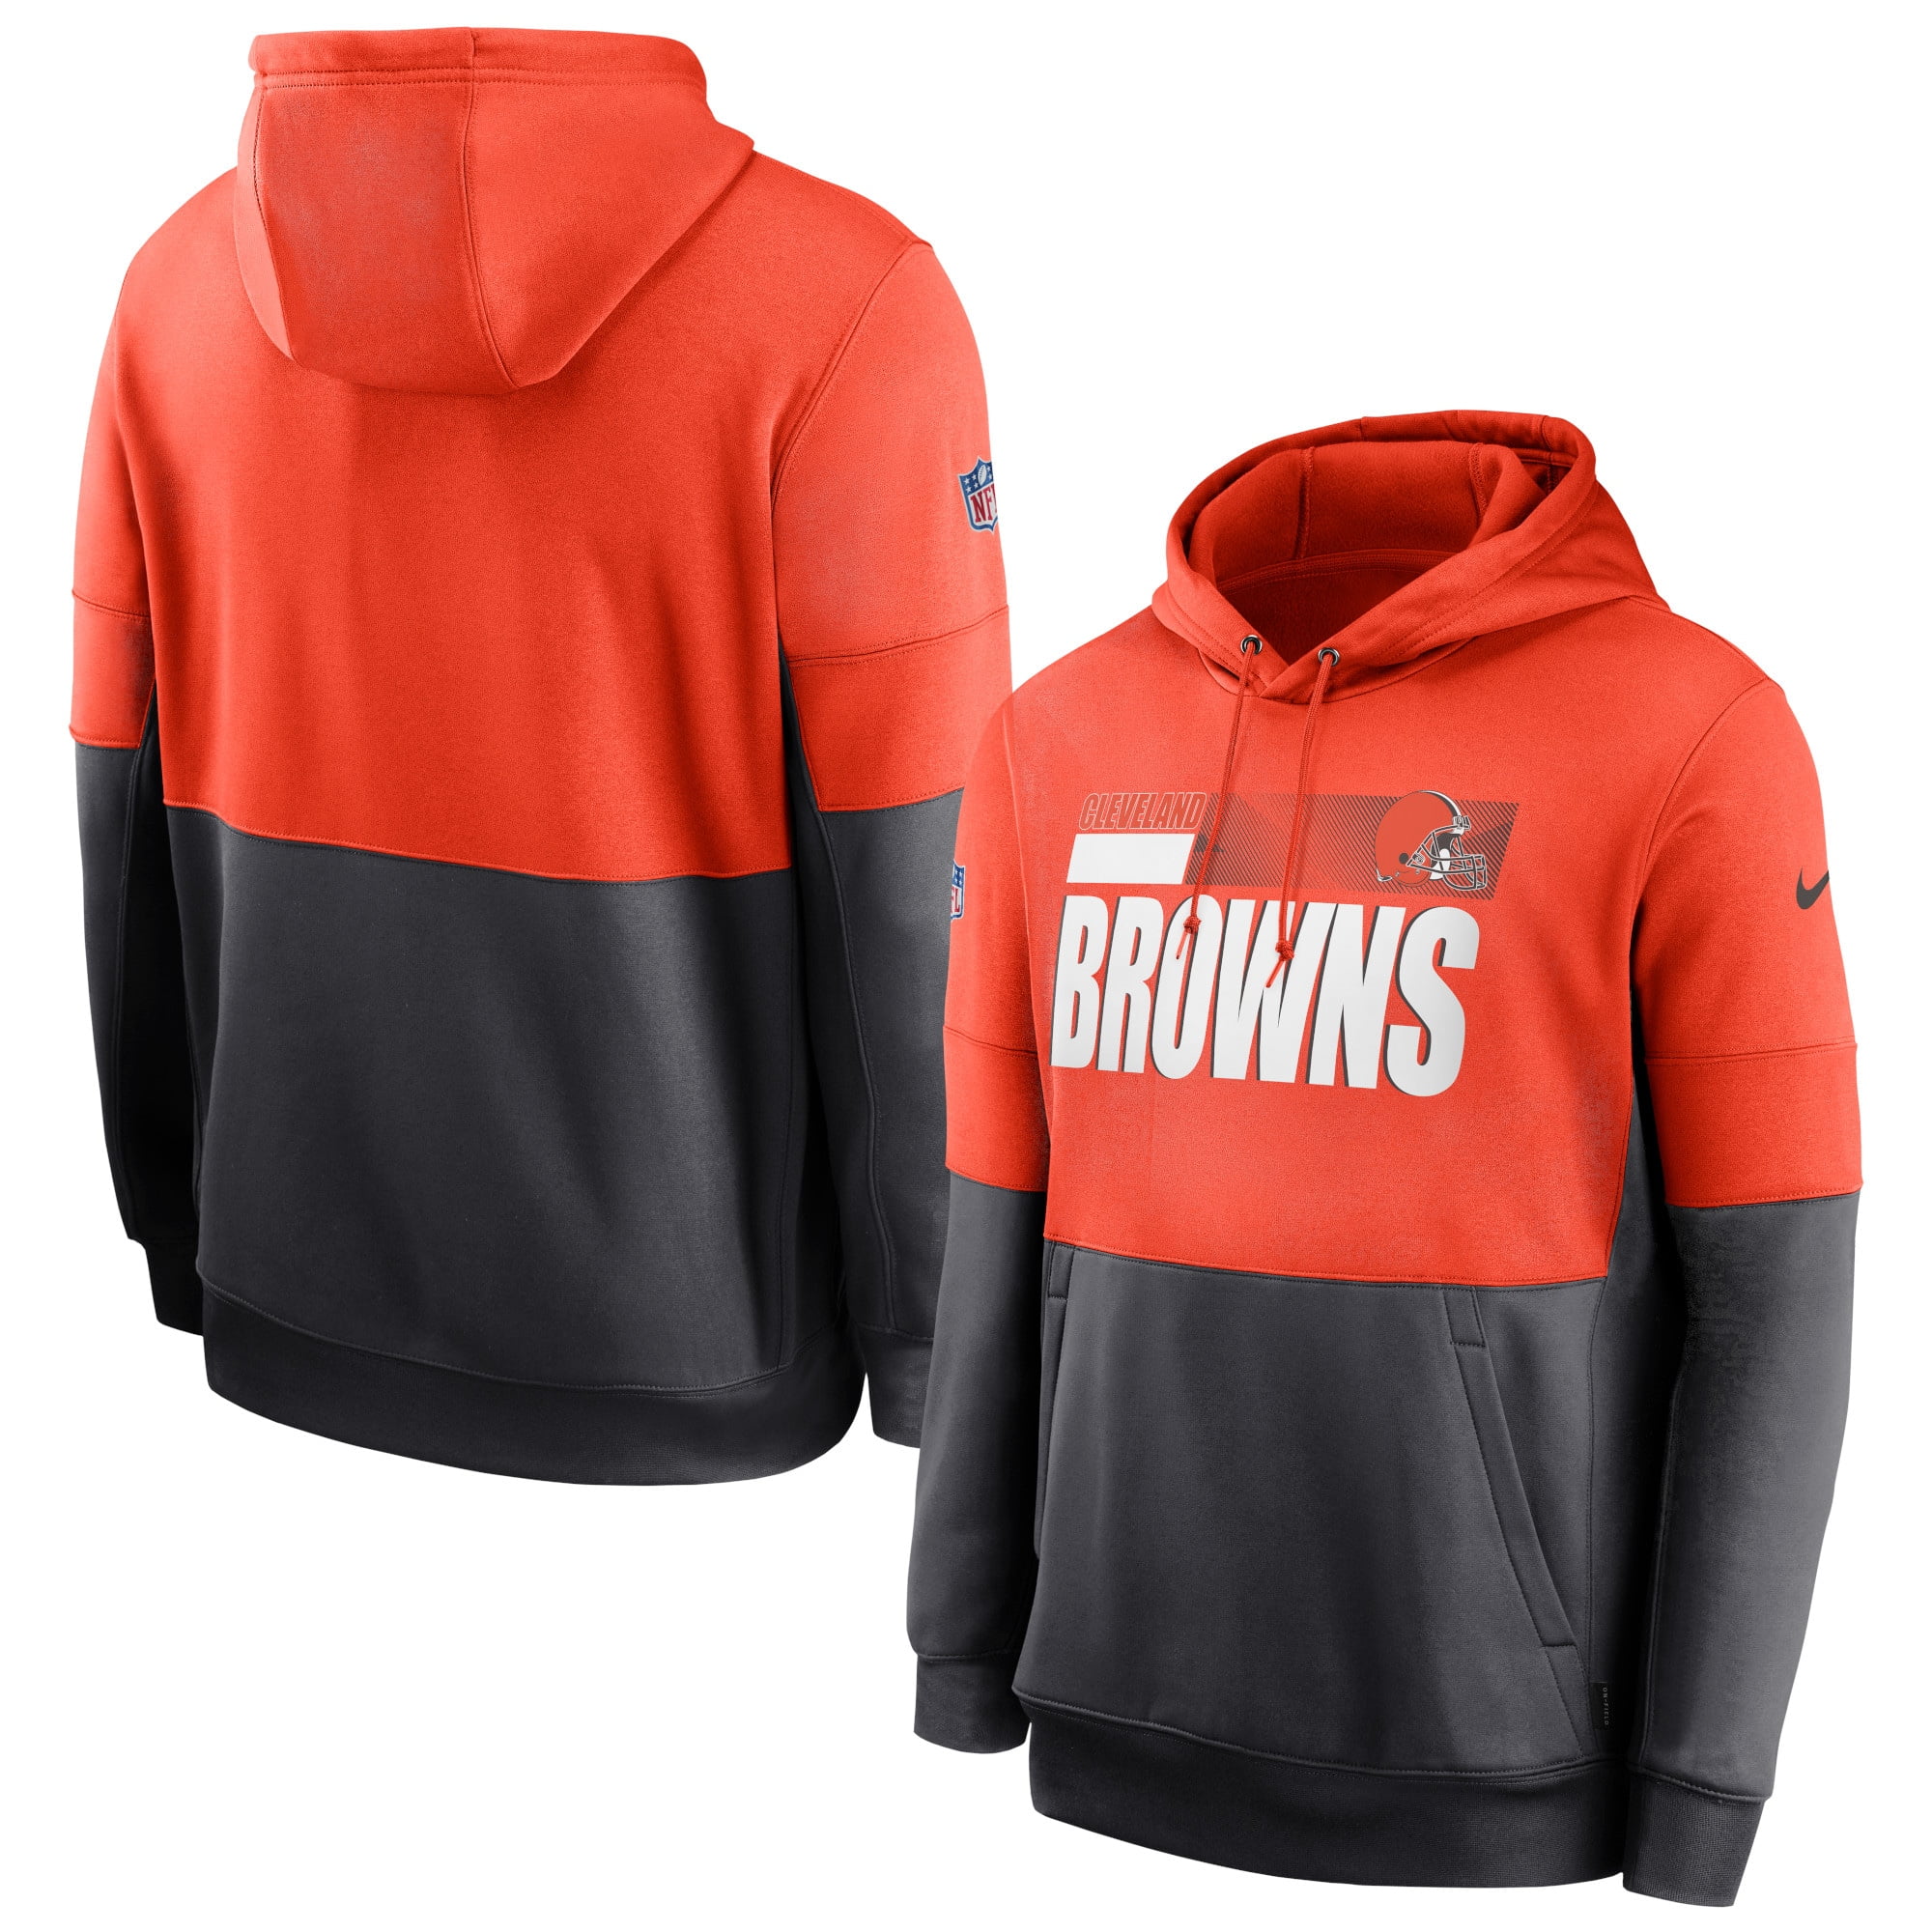 cleveland browns hoodies